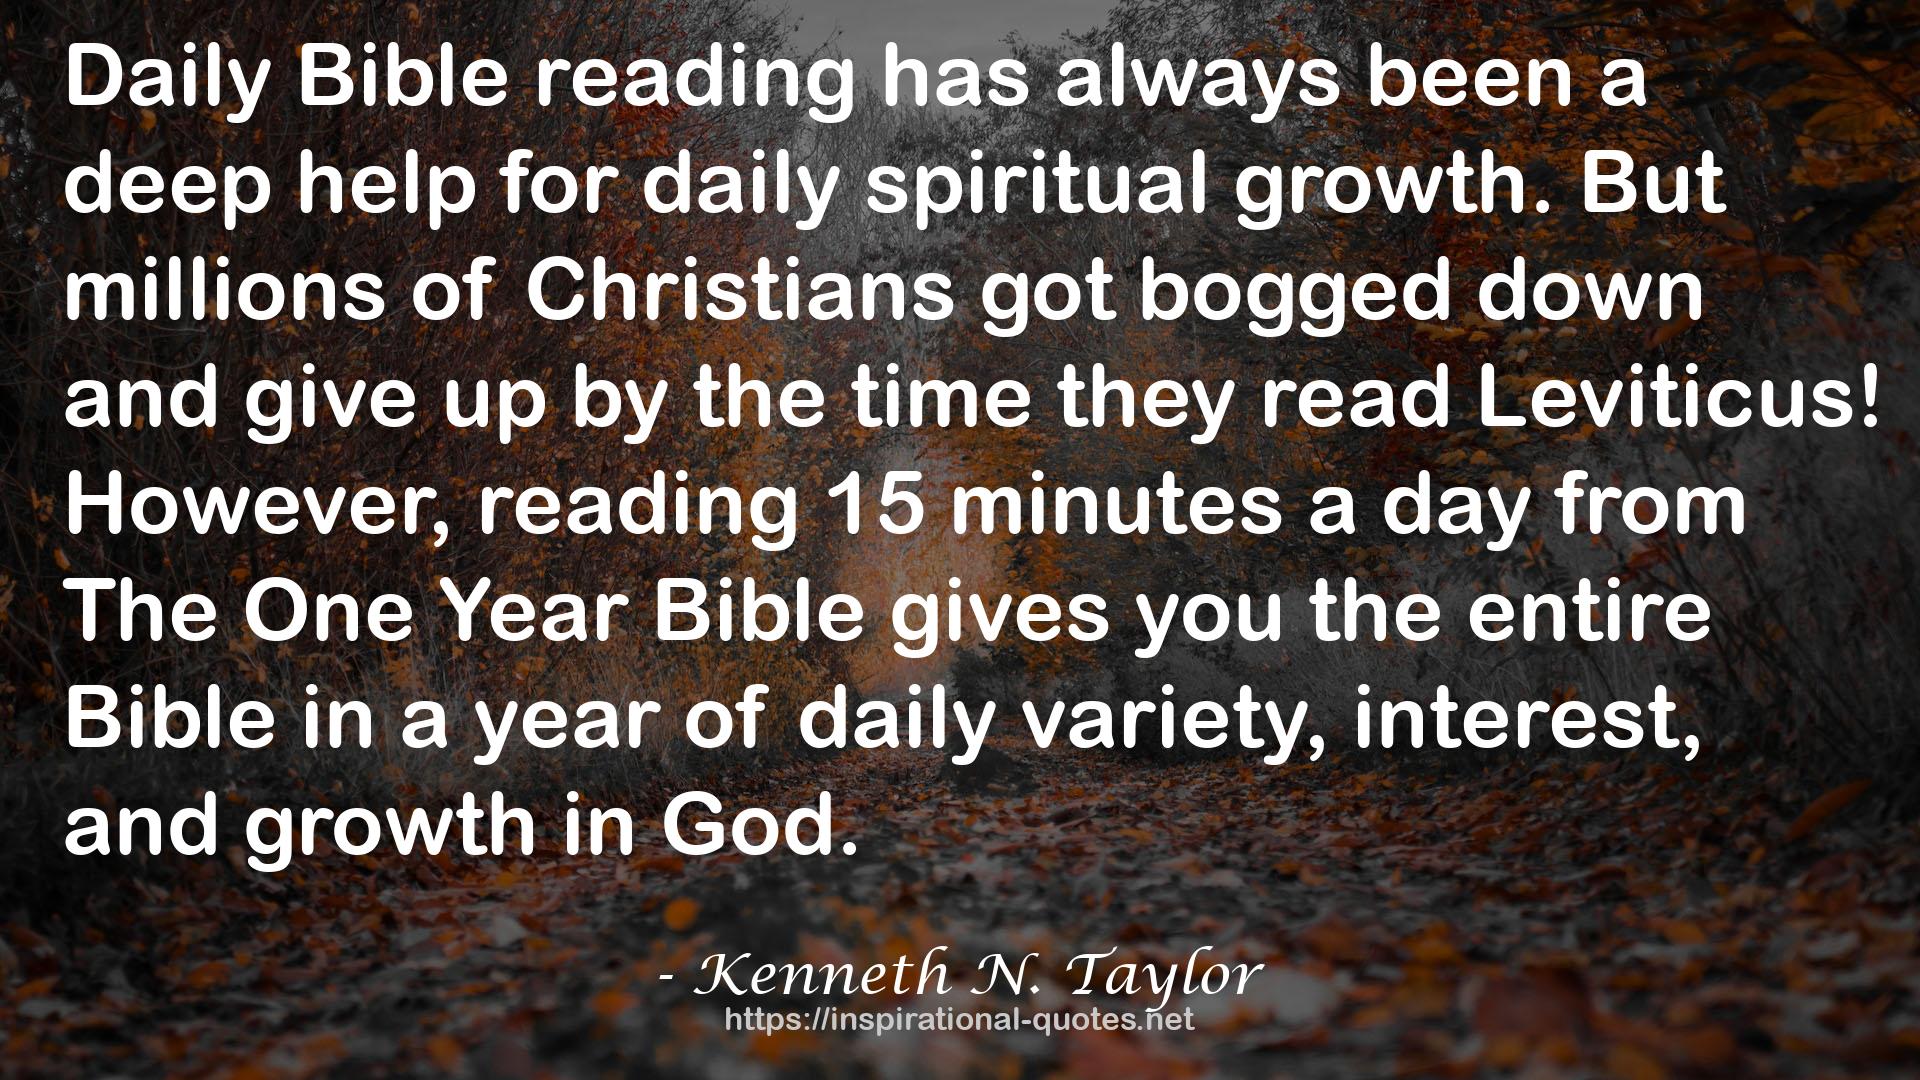 Kenneth N. Taylor QUOTES